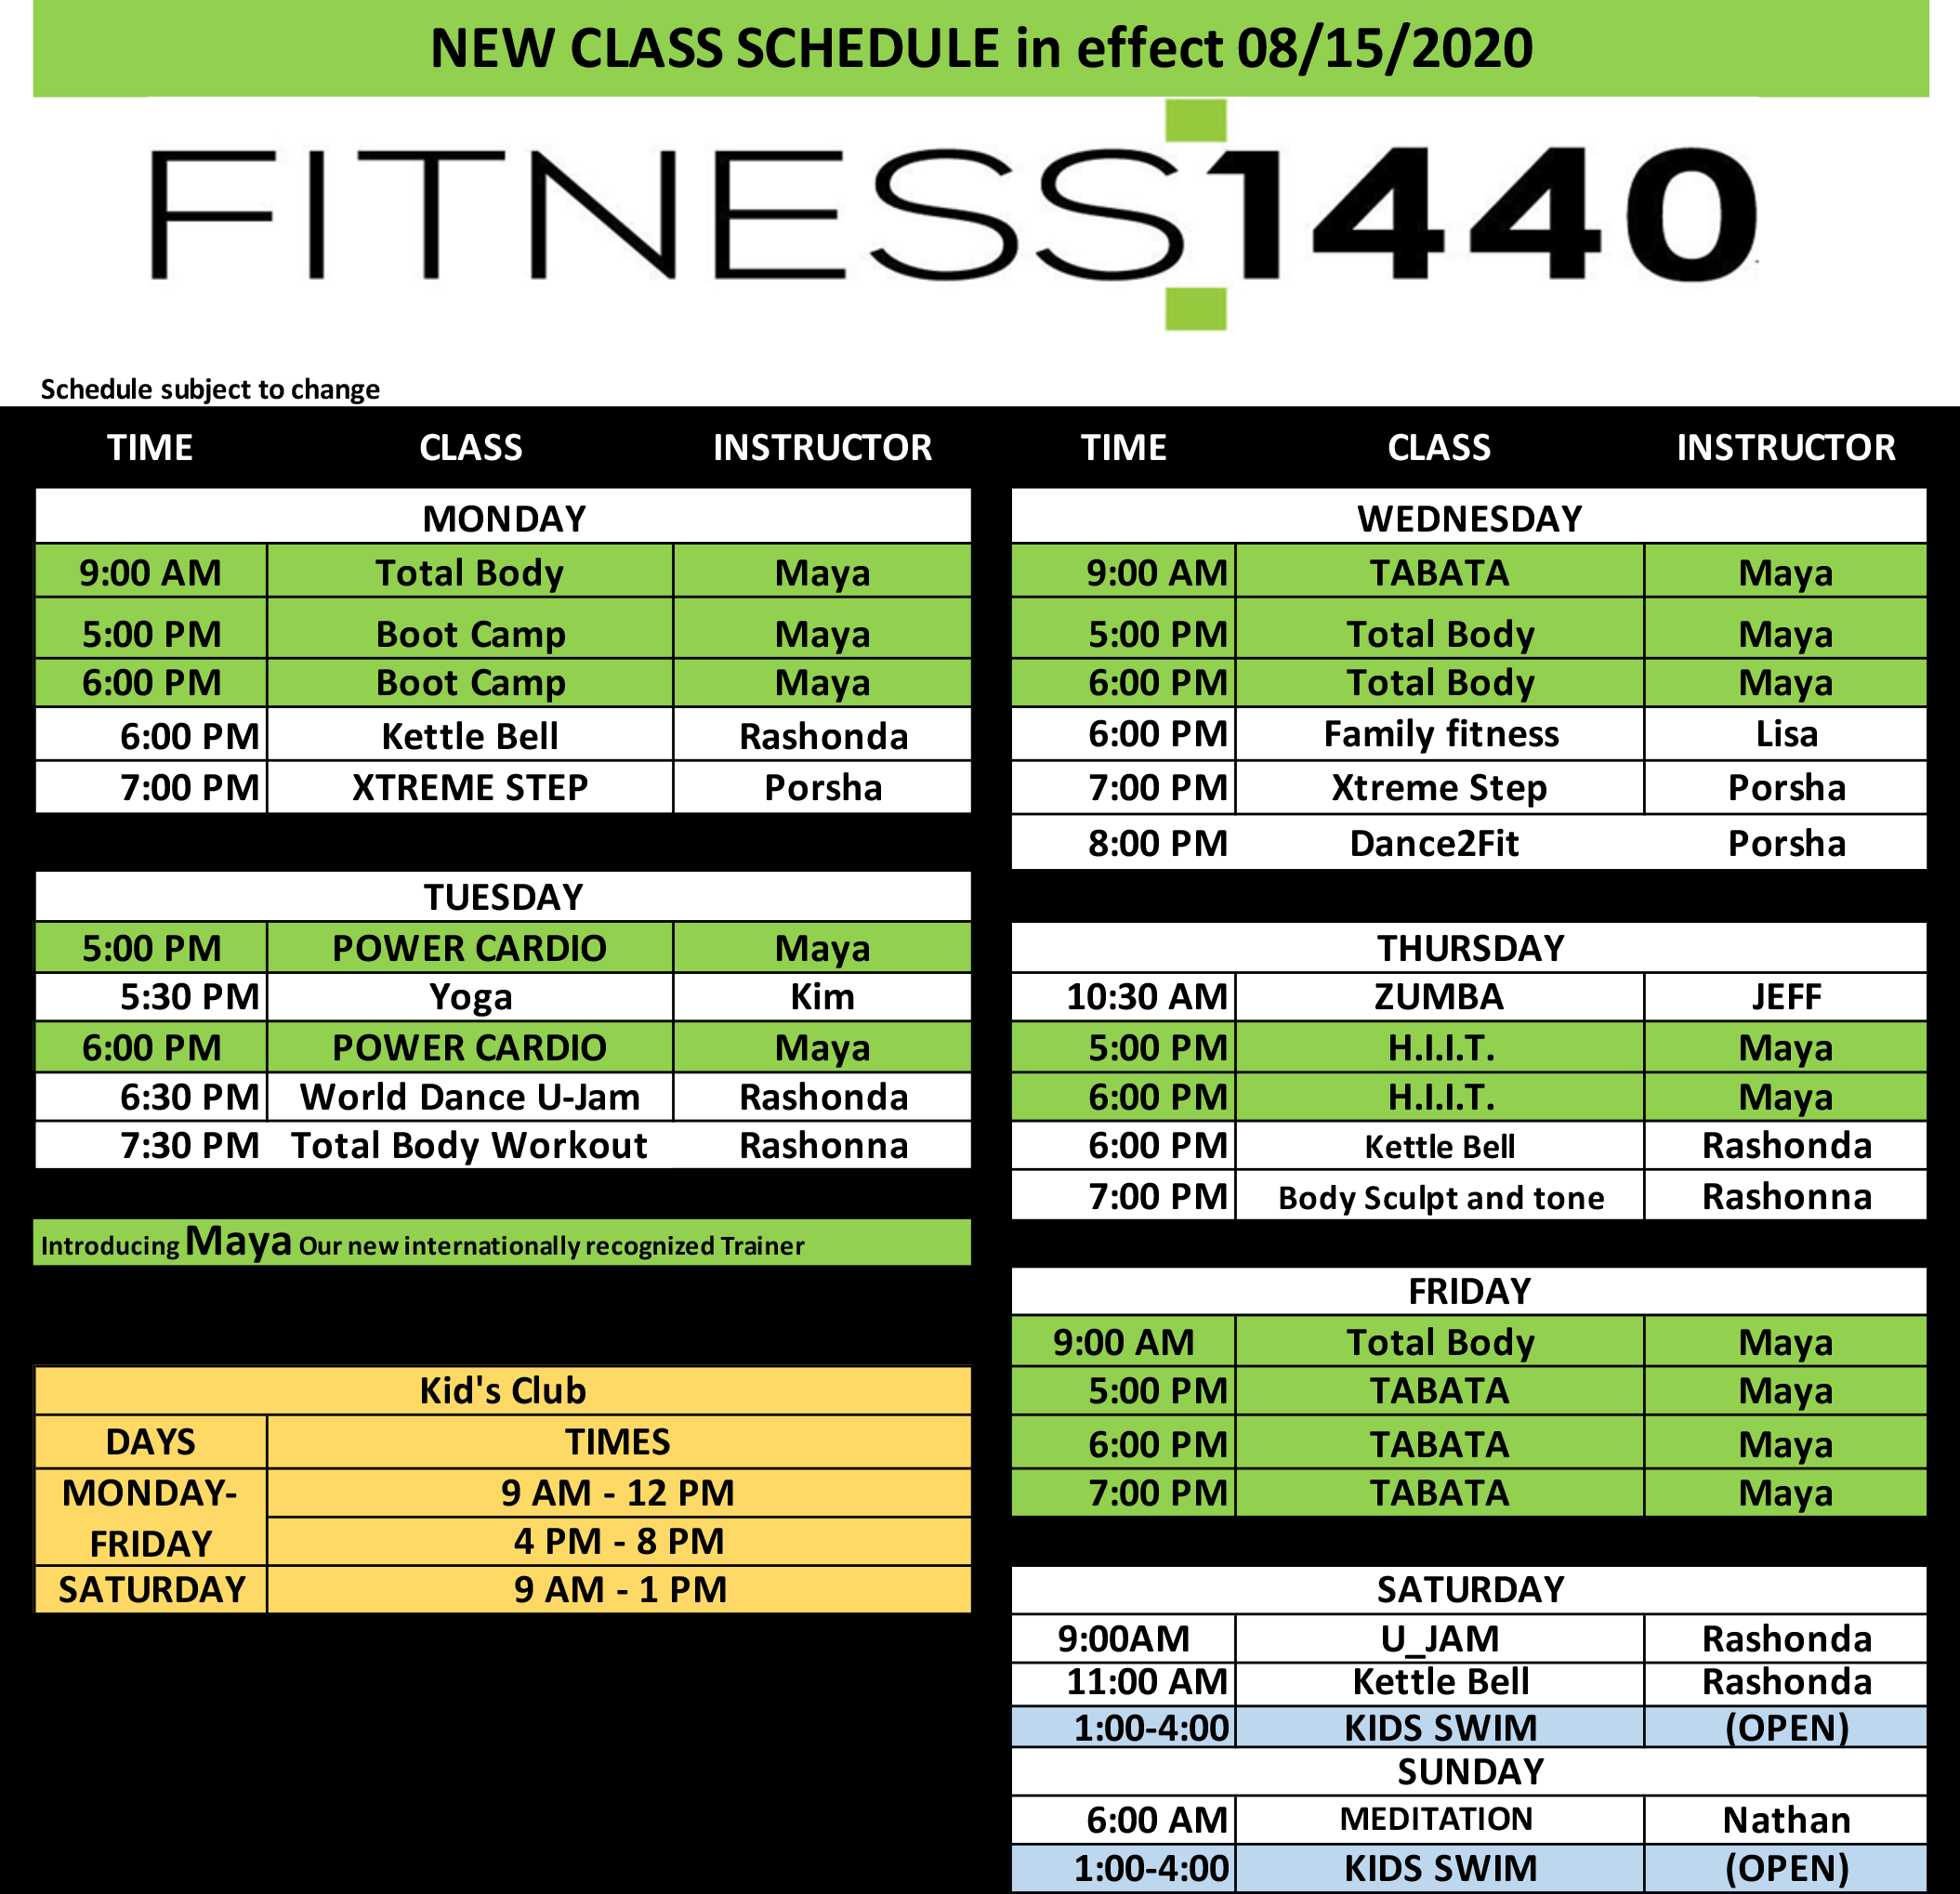 Schedule Fitness 1440 Nashville, TN 24 Hour Gym and Gym Franchises